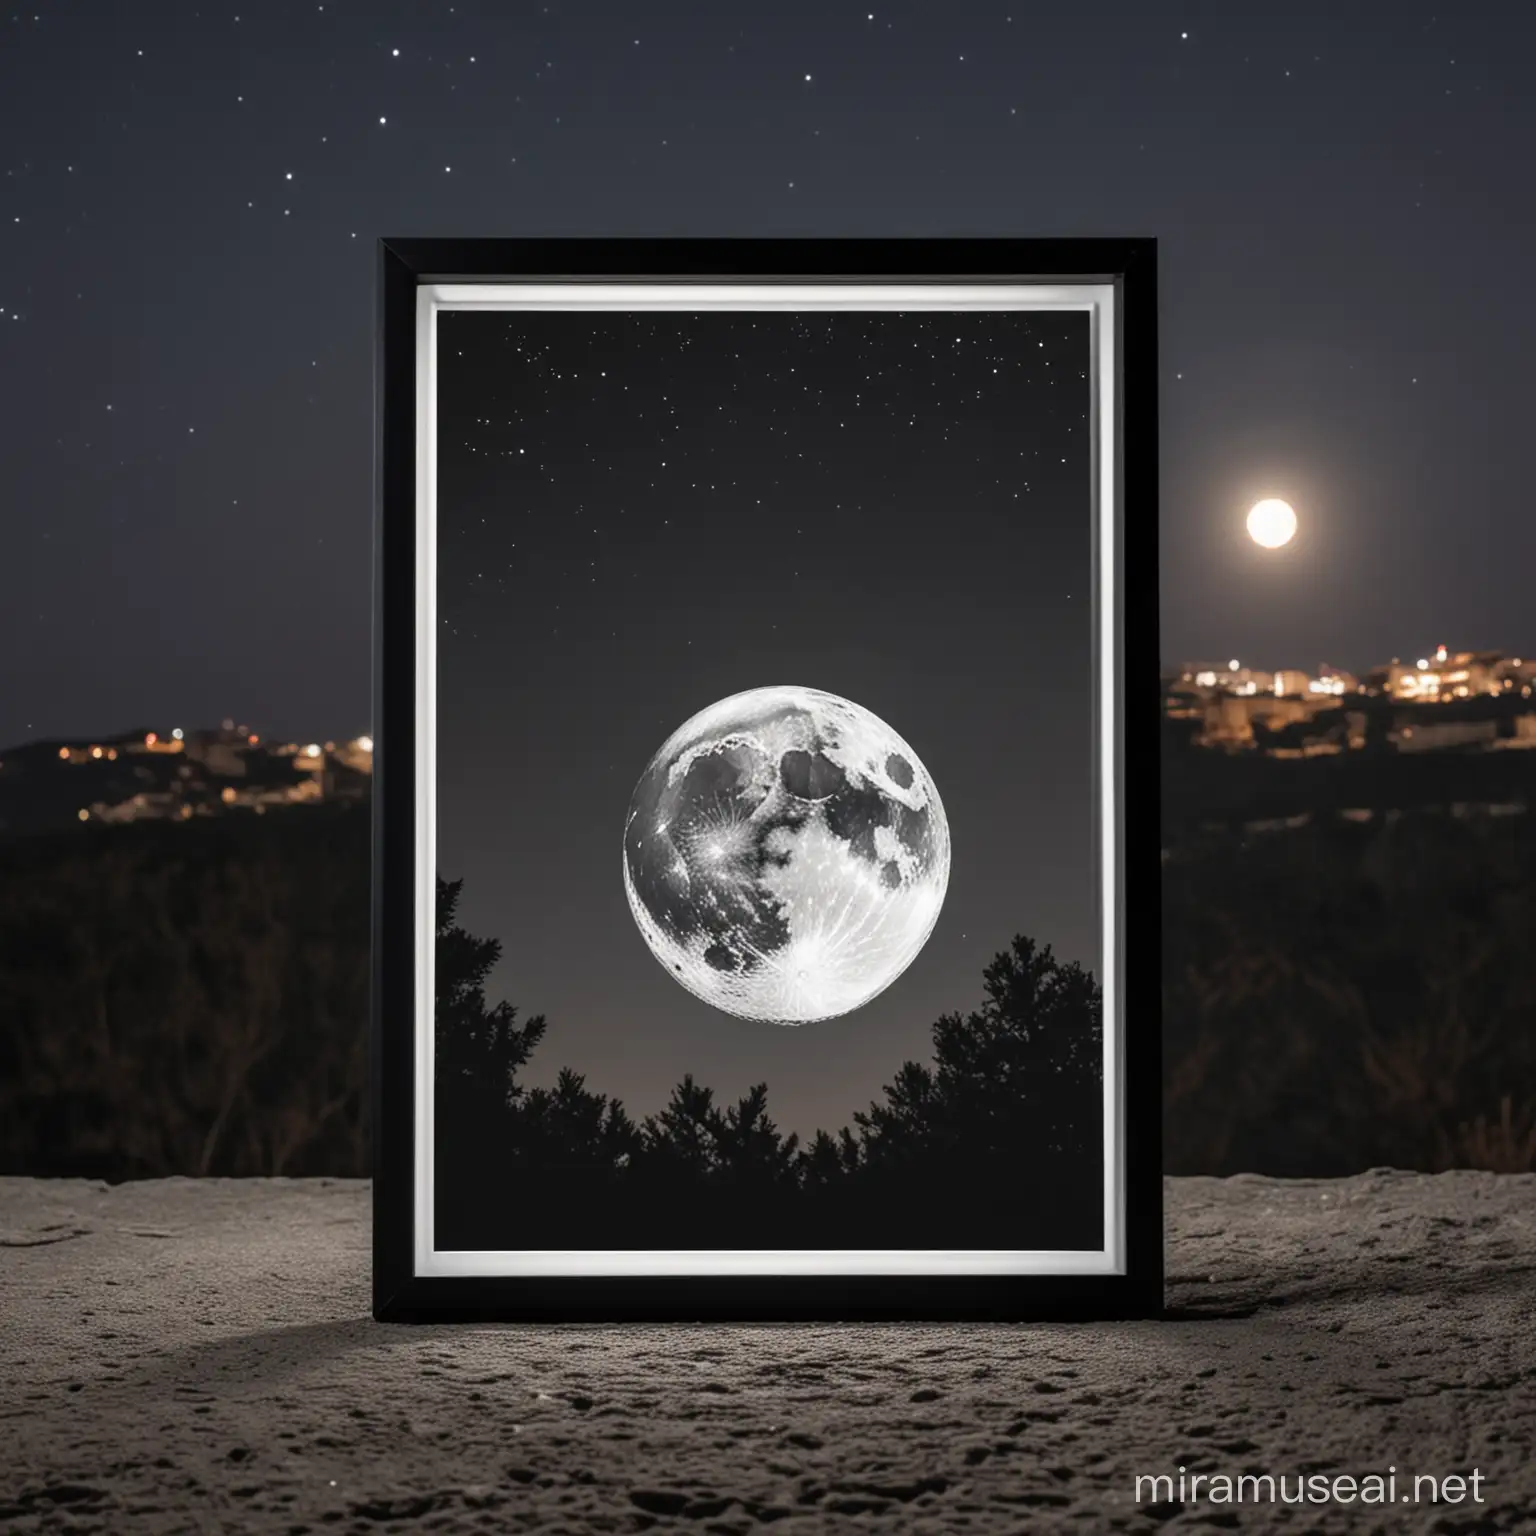 A4 black frame mockup outside during the night with a full moon